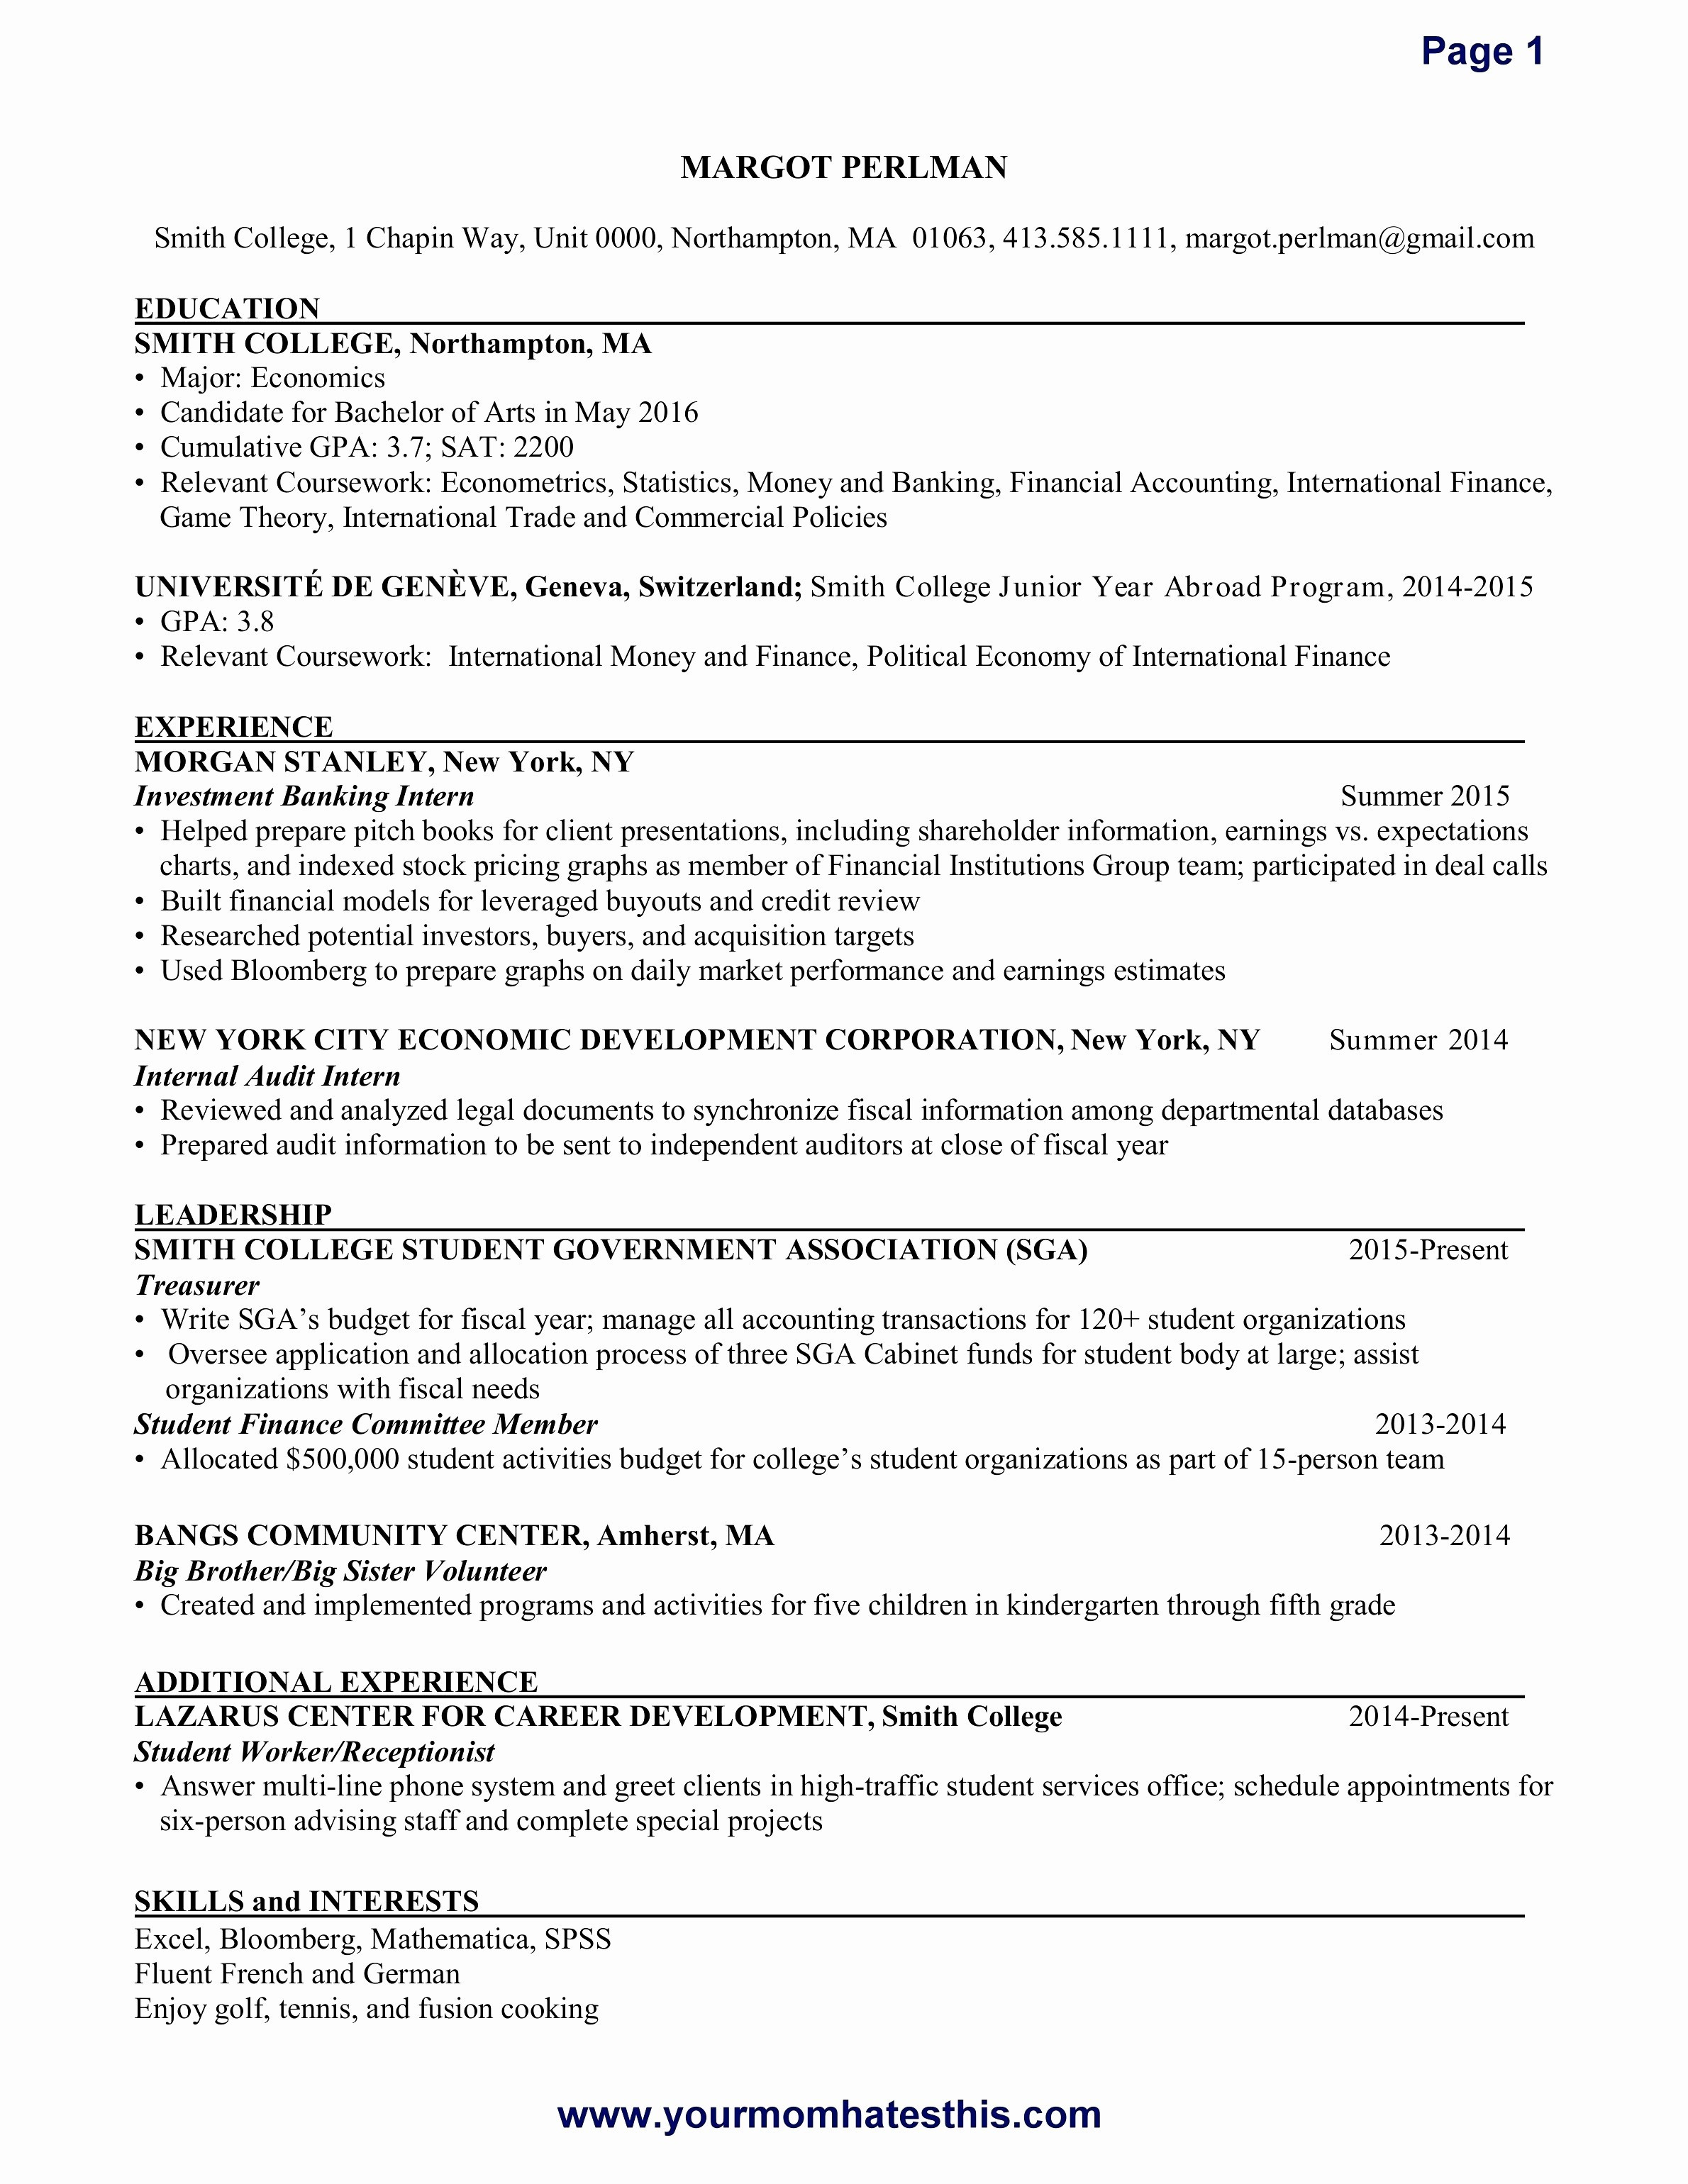 letter to shareholders template Collection-Write Resume Template Fresh Lovely Pr Resume Template Elegant Dictionary Template 0d Archives 10-h